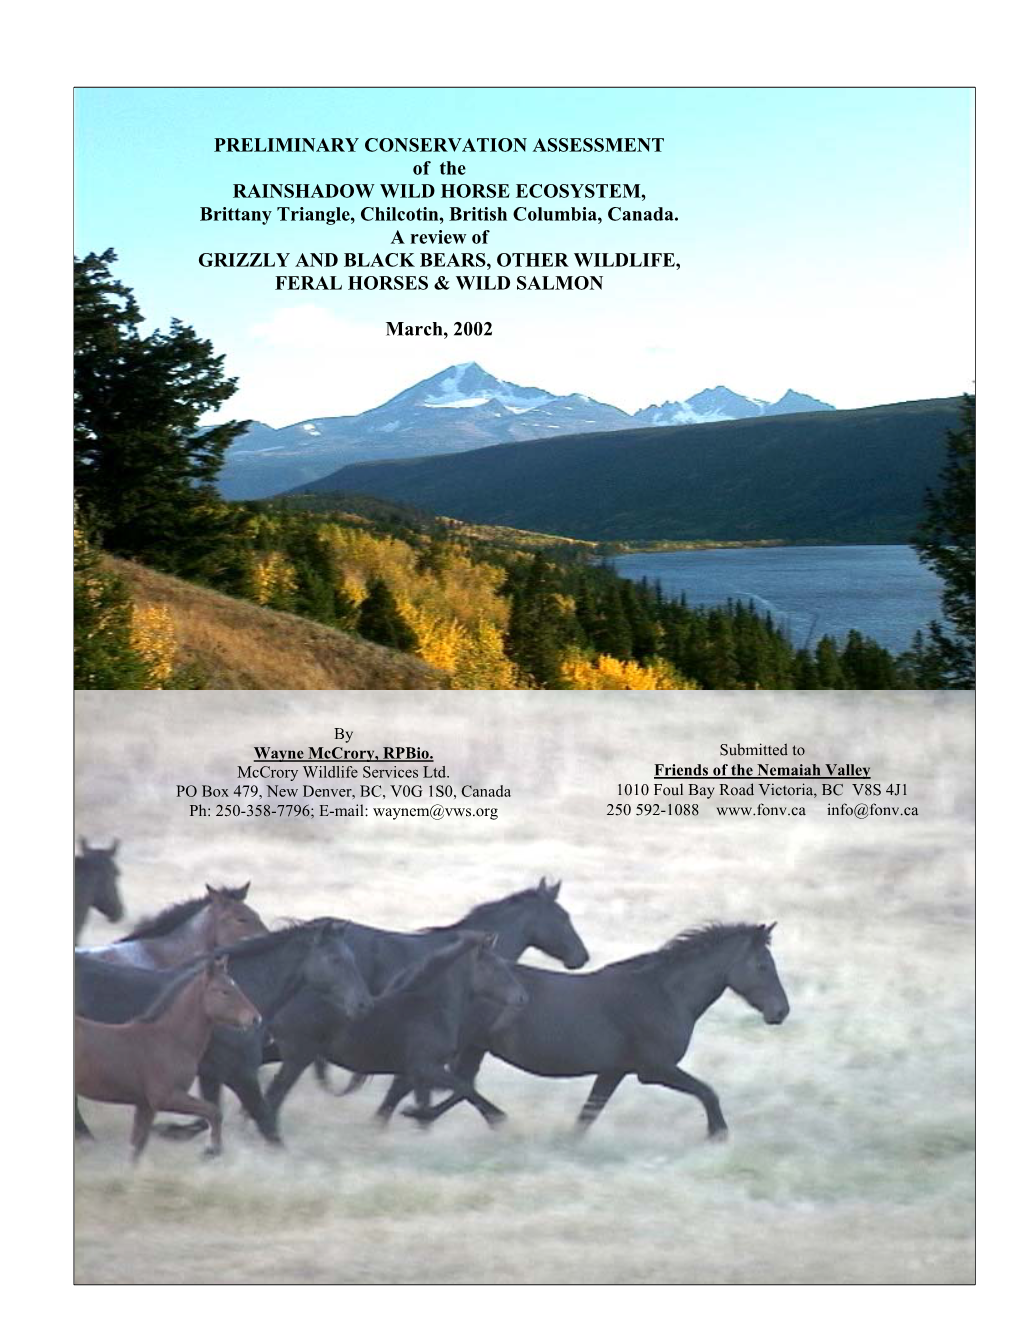 PRELIMINARY CONSERVATION ASSESSMENT of the RAINSHADOW WILD HORSE ECOSYSTEM, Brittany Triangle, Chilcotin, British Columbia, Canada